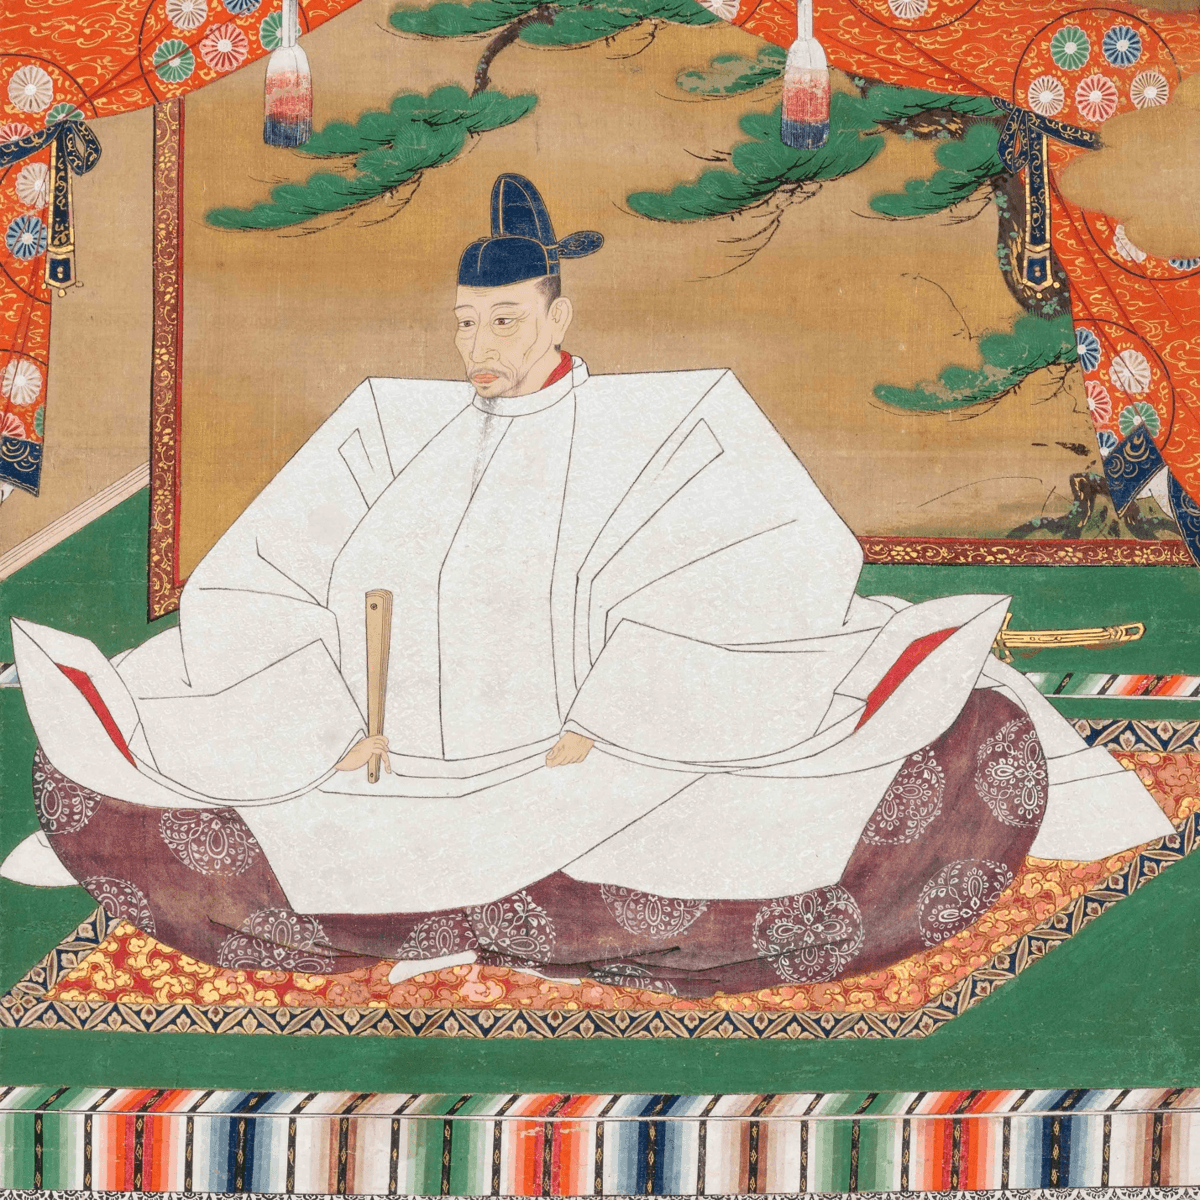 This 1598 portrait of Toyotomi Hideyoshi depicts the ruler who instituted an isolationist trade policy with the West in the late 1500s and early 1600s. (Public Domain)